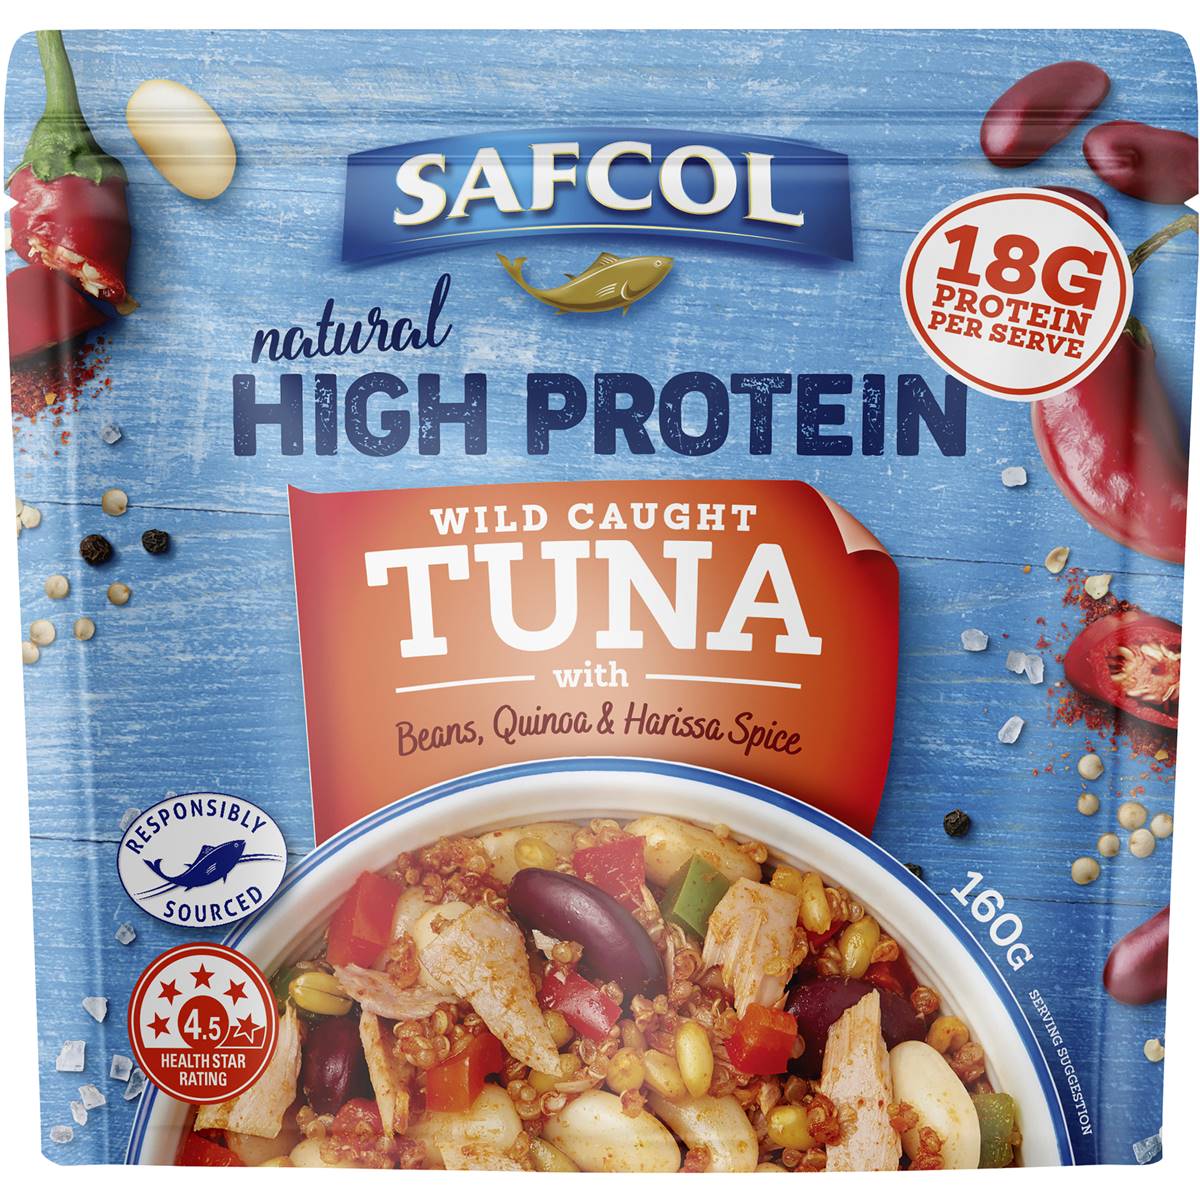 Calories in Safcol Tuna Pouch Red Beans & Quinoa